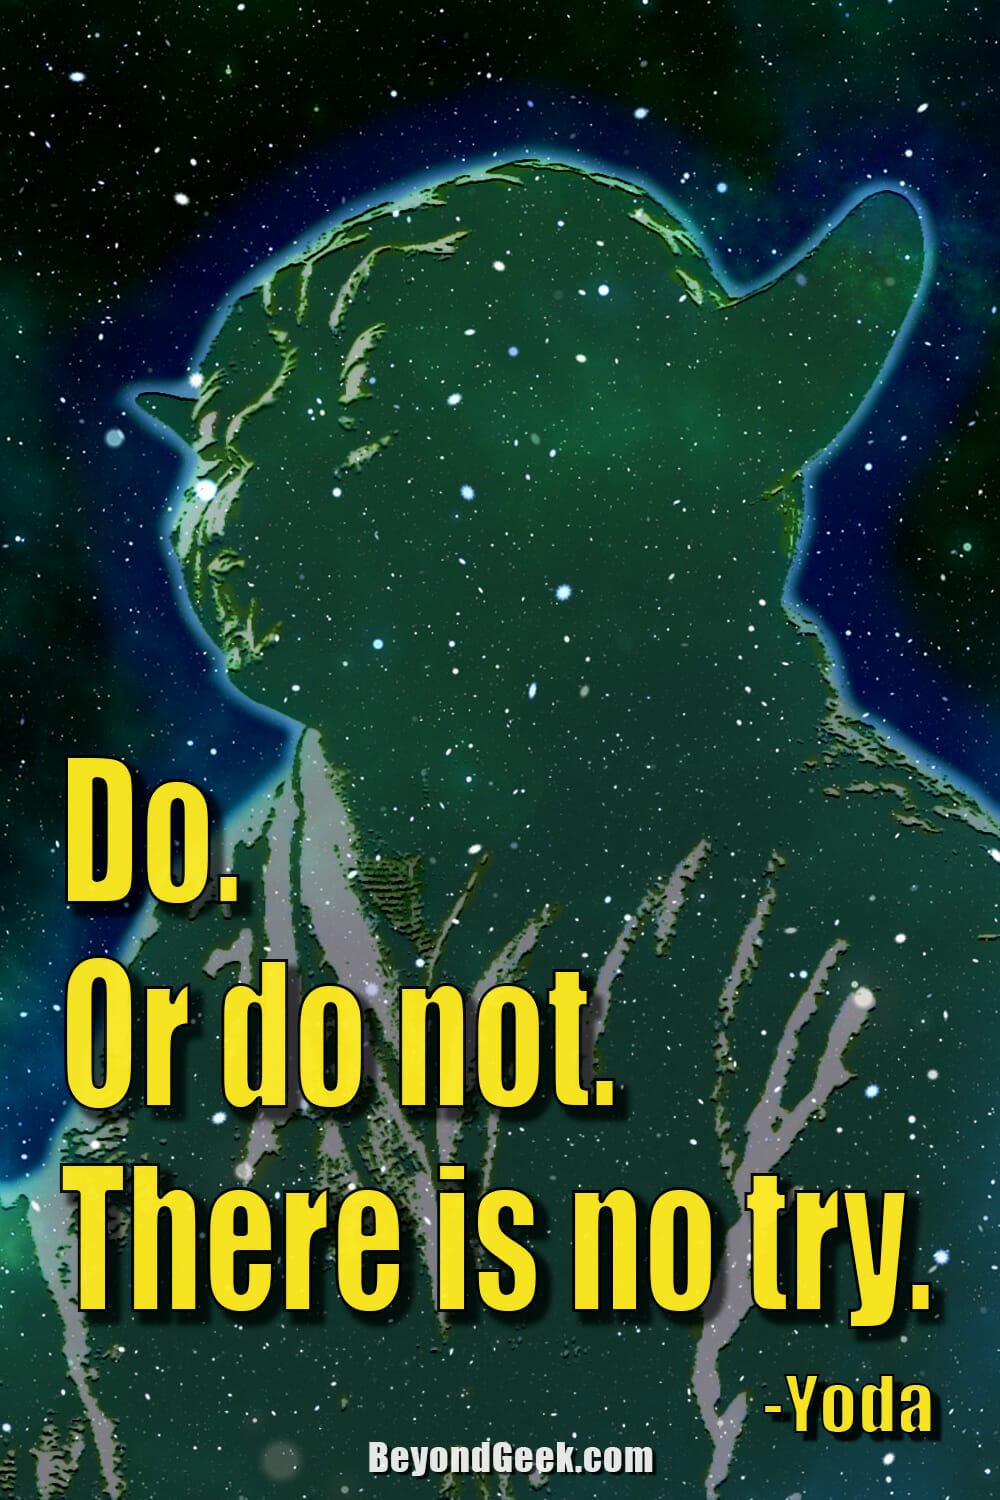 Do or do not there is no try yoda quote.